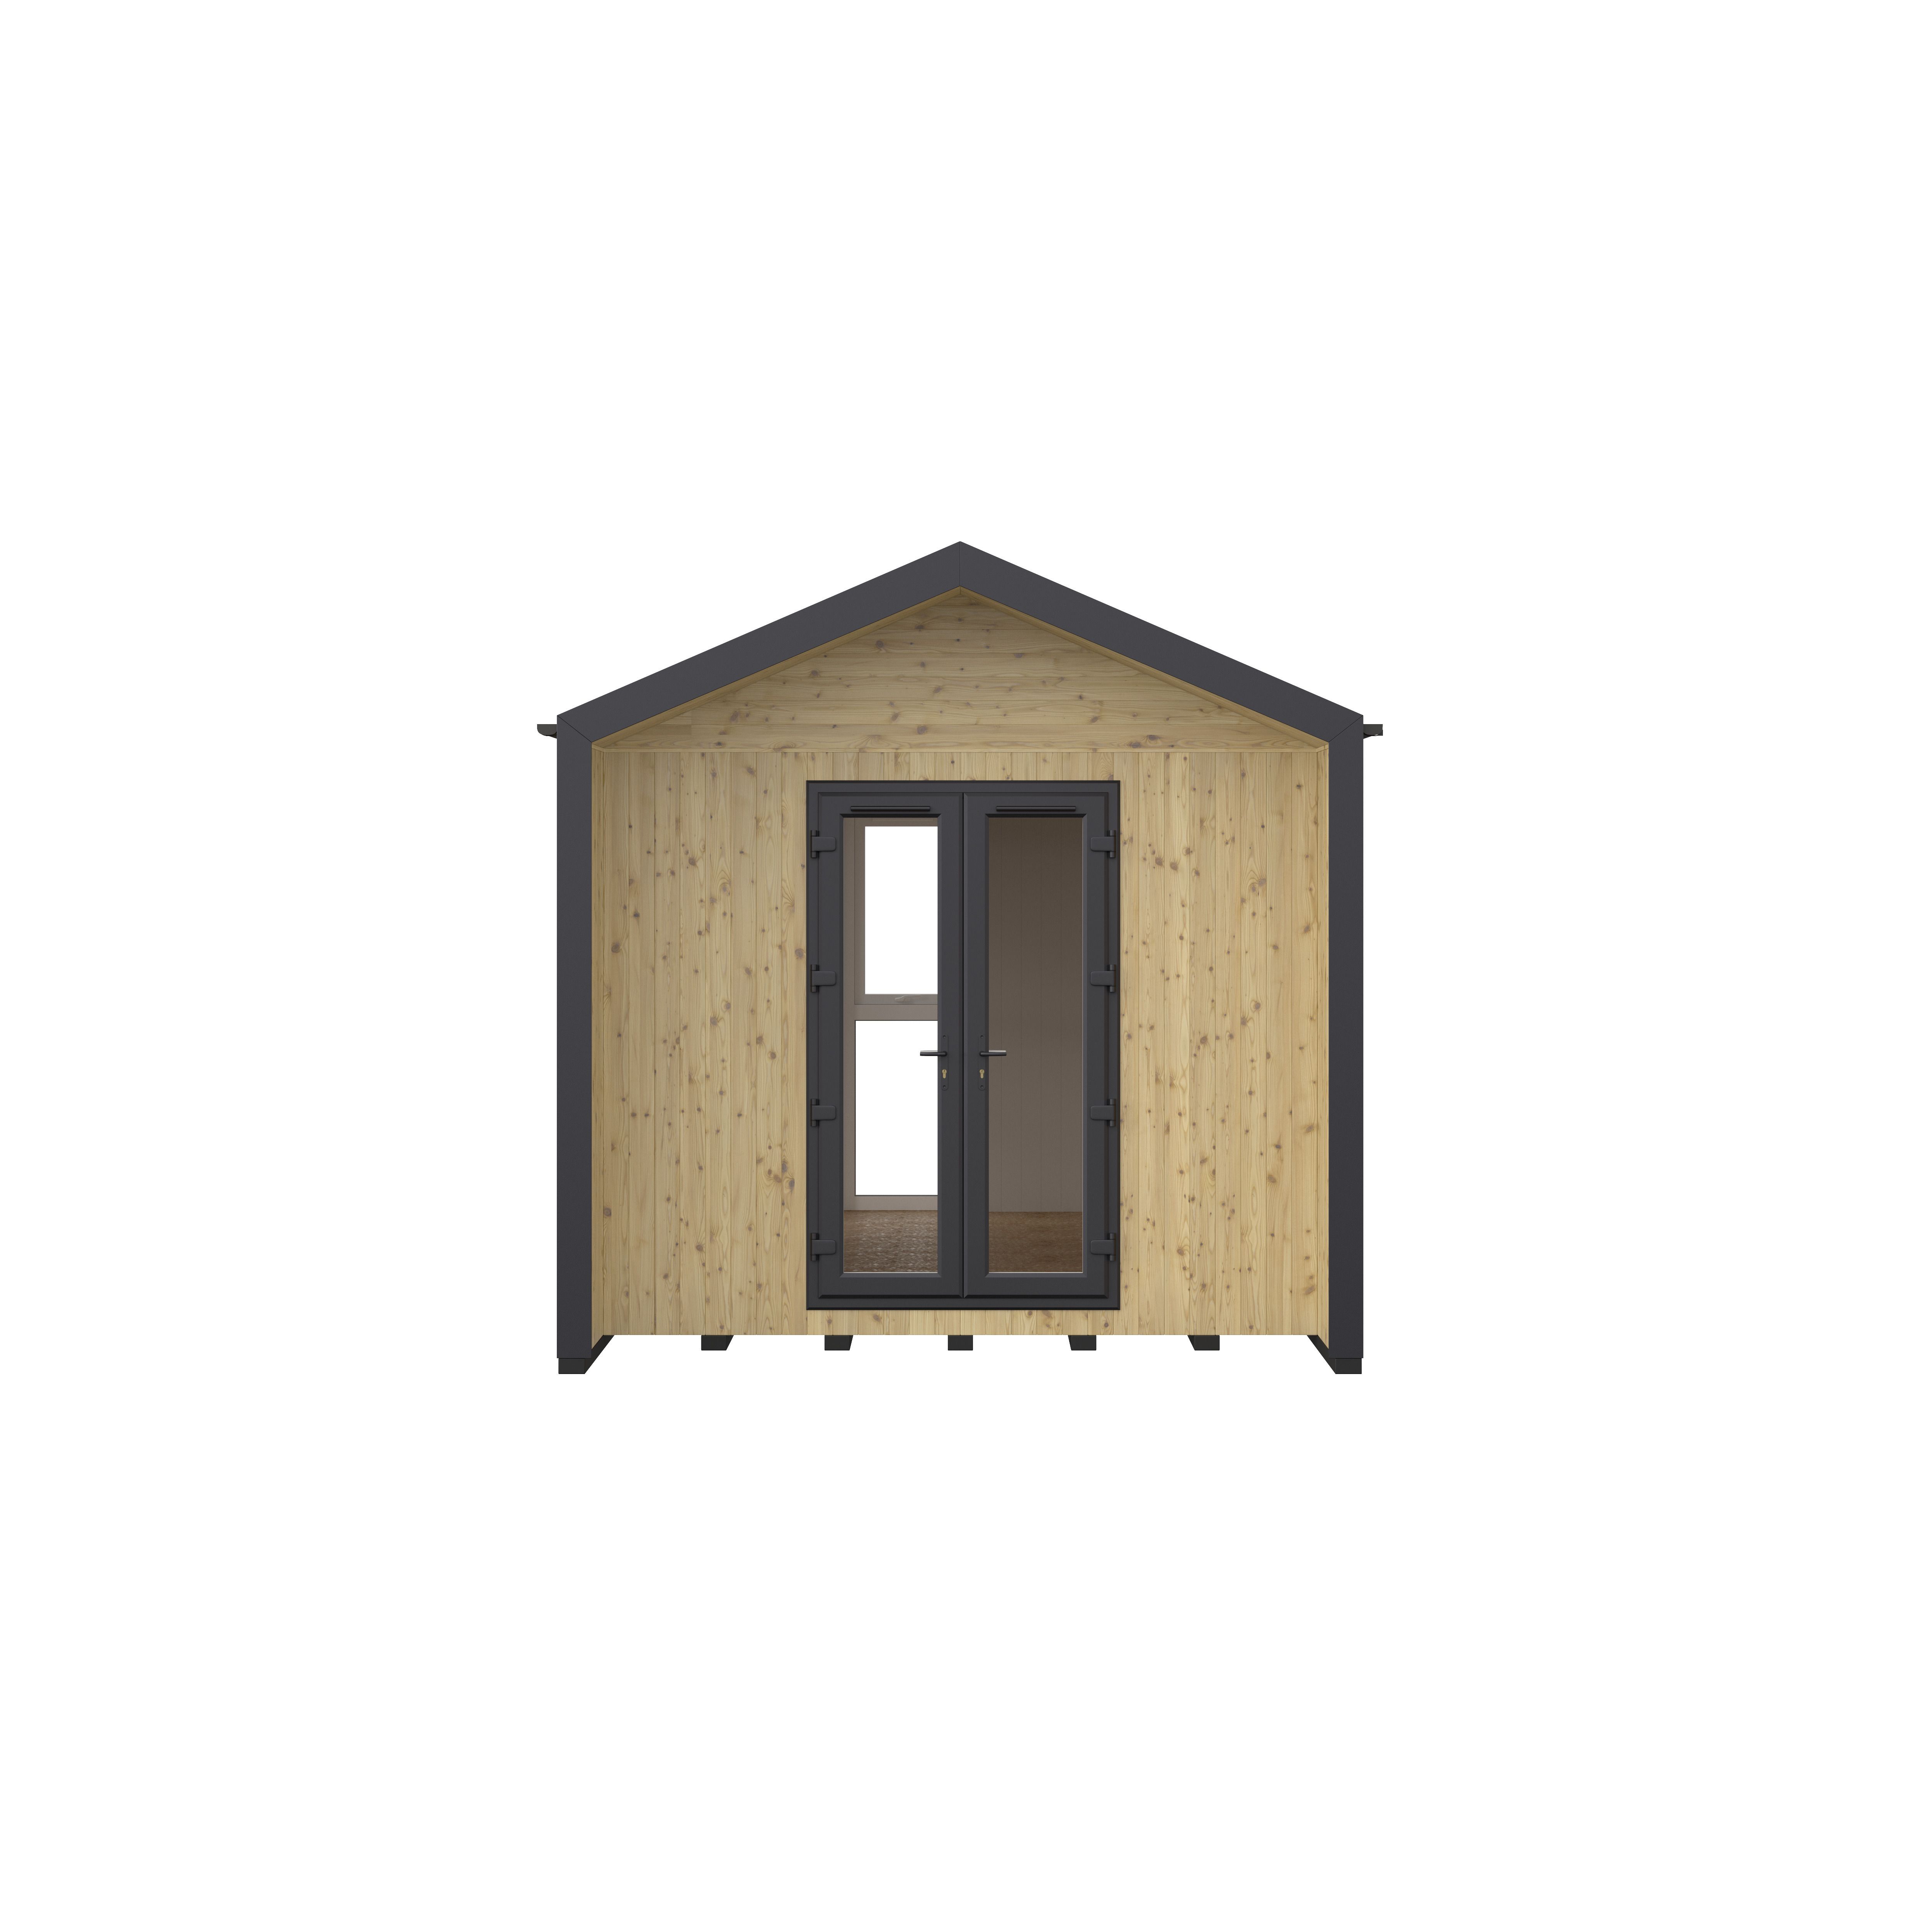 GoodHome Semora 10x14 ft with Double door Pitch Wooden Garden room 3m x 4.4m (Base included)